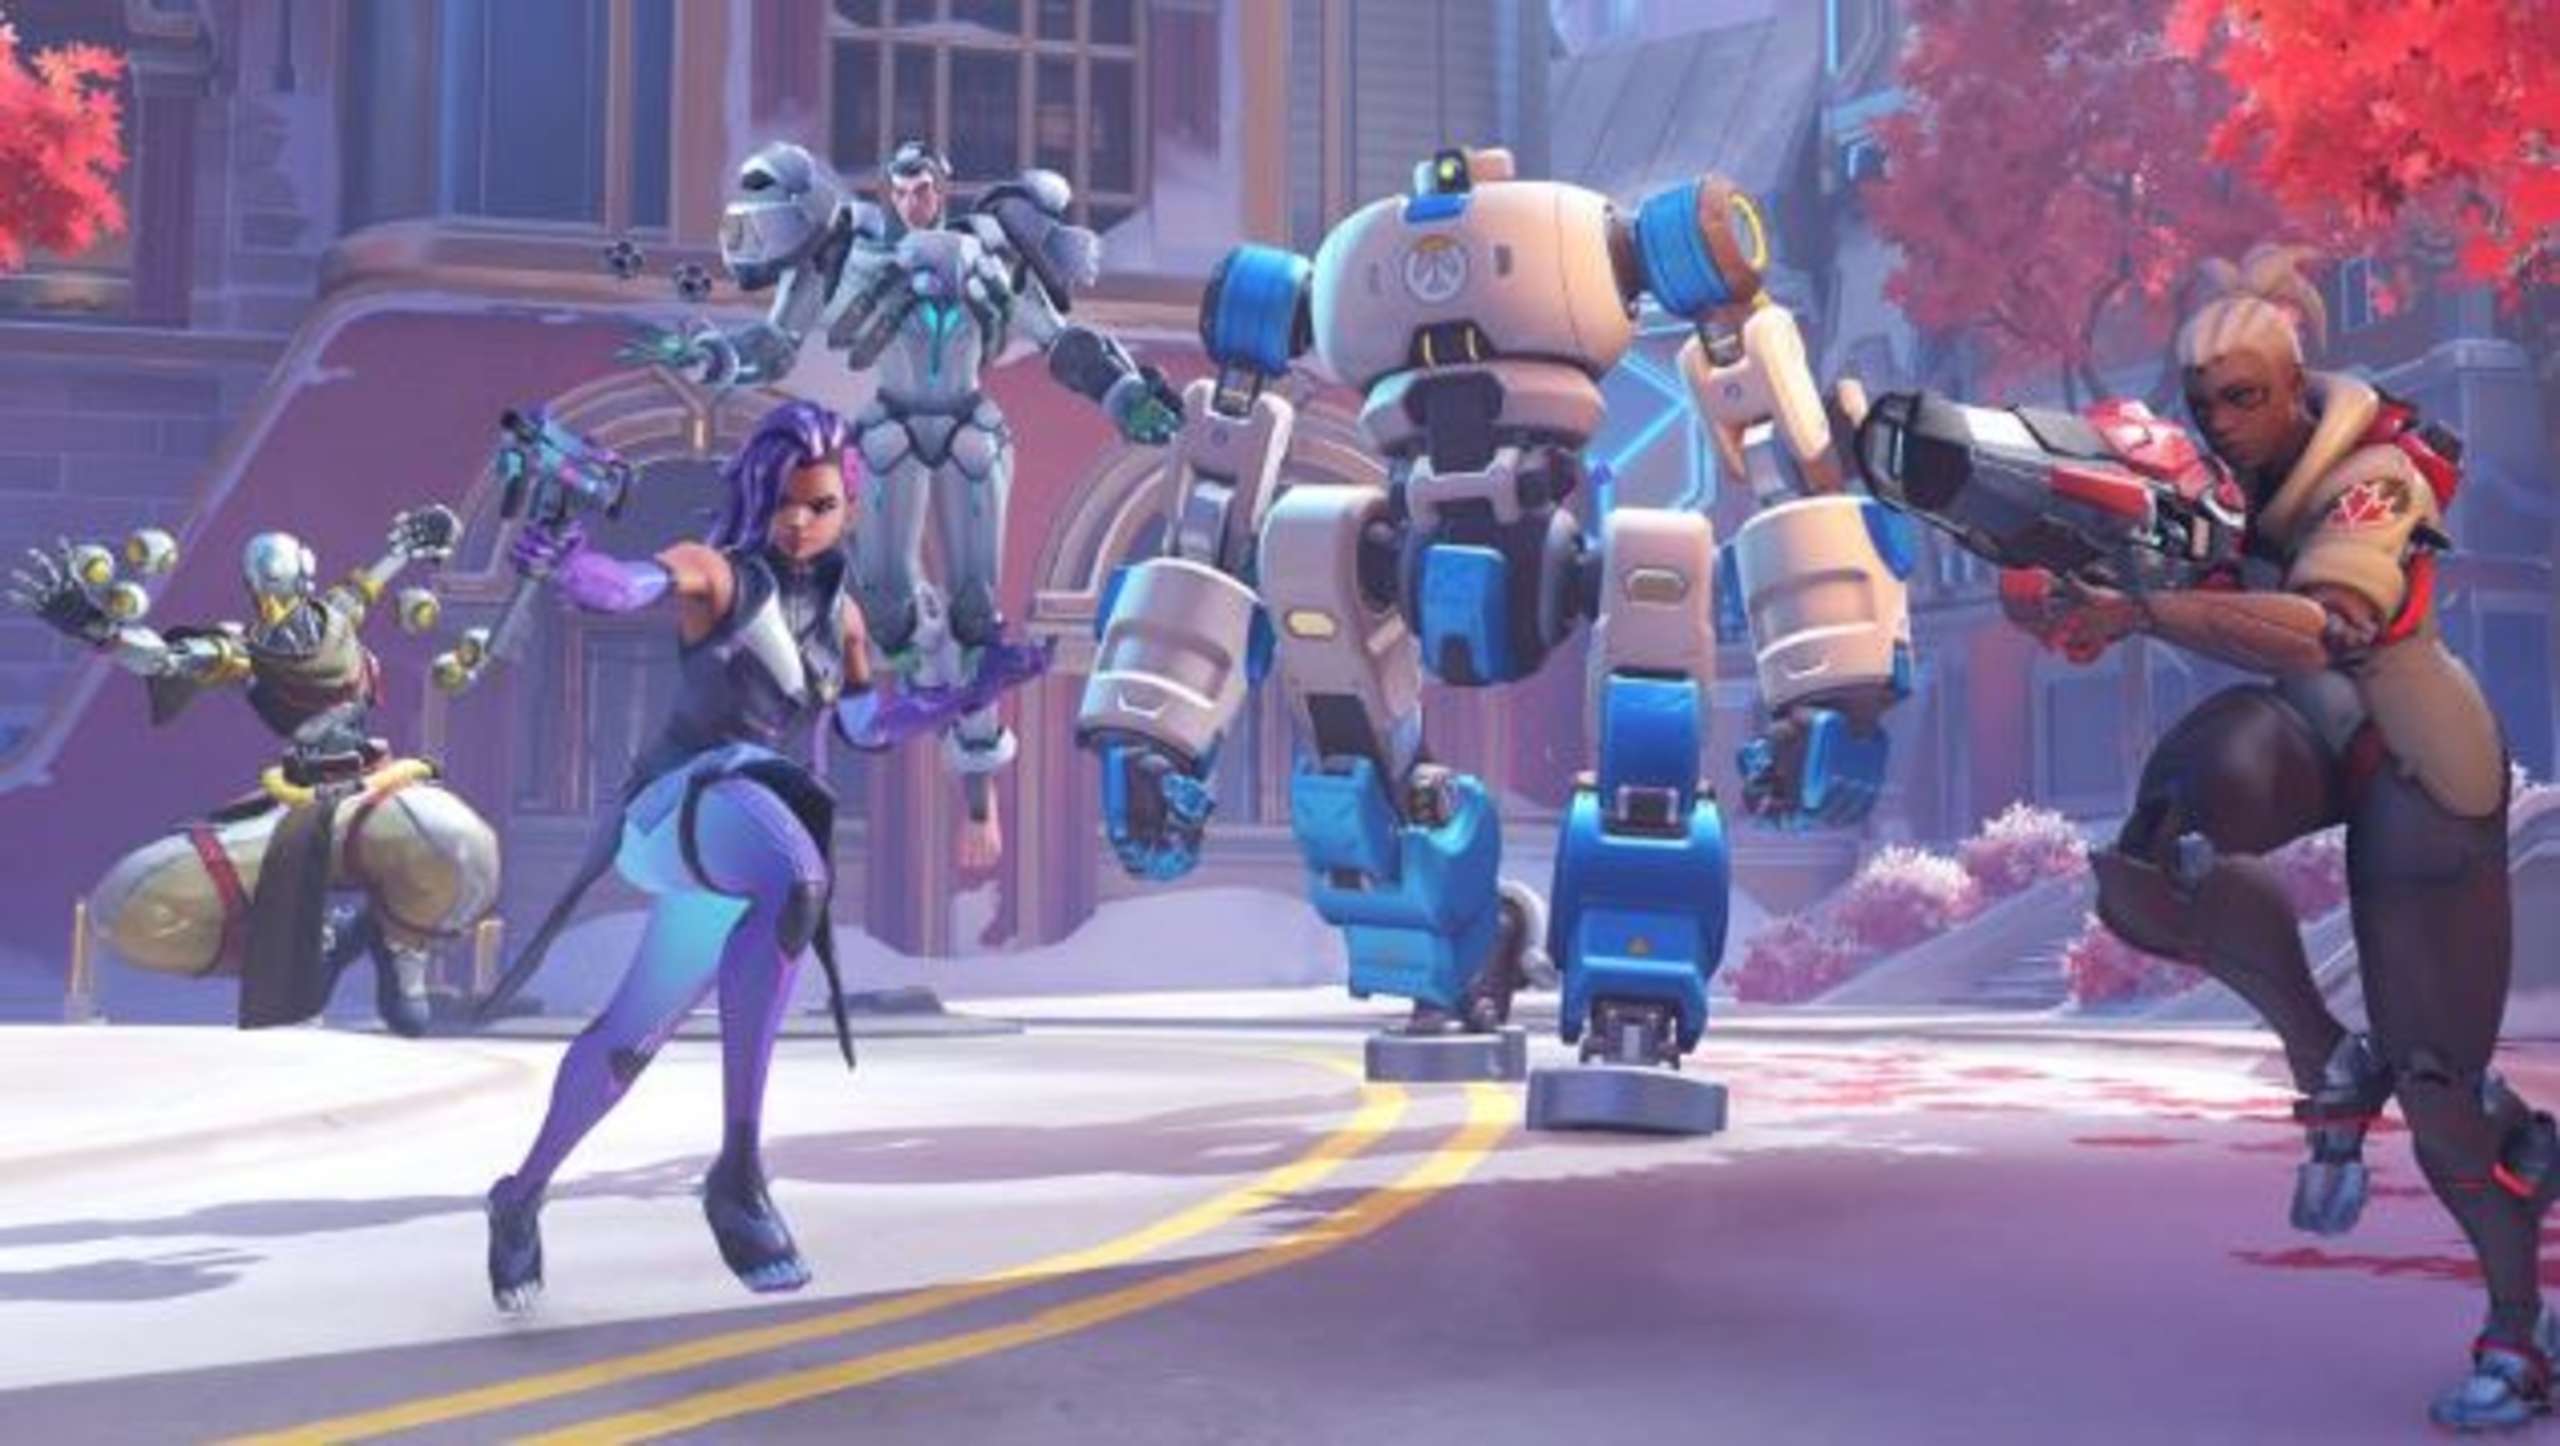 In The Beta For Overwatch 2, Blizzard Details Adjustments To Several Heroes That Will Be Changed Before The Full Release Next Month